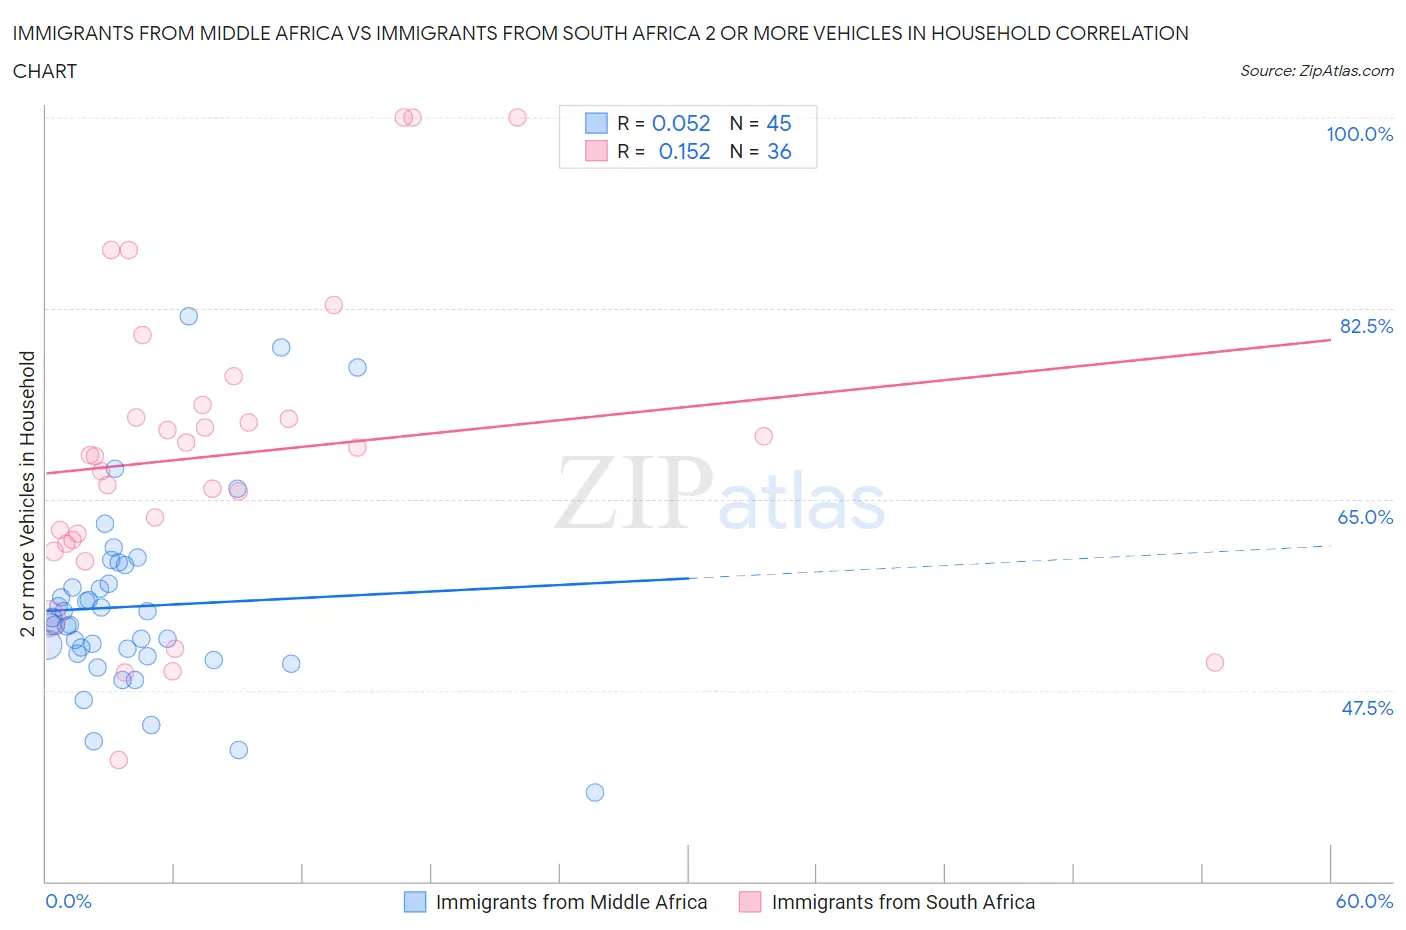 Immigrants from Middle Africa vs Immigrants from South Africa 2 or more Vehicles in Household